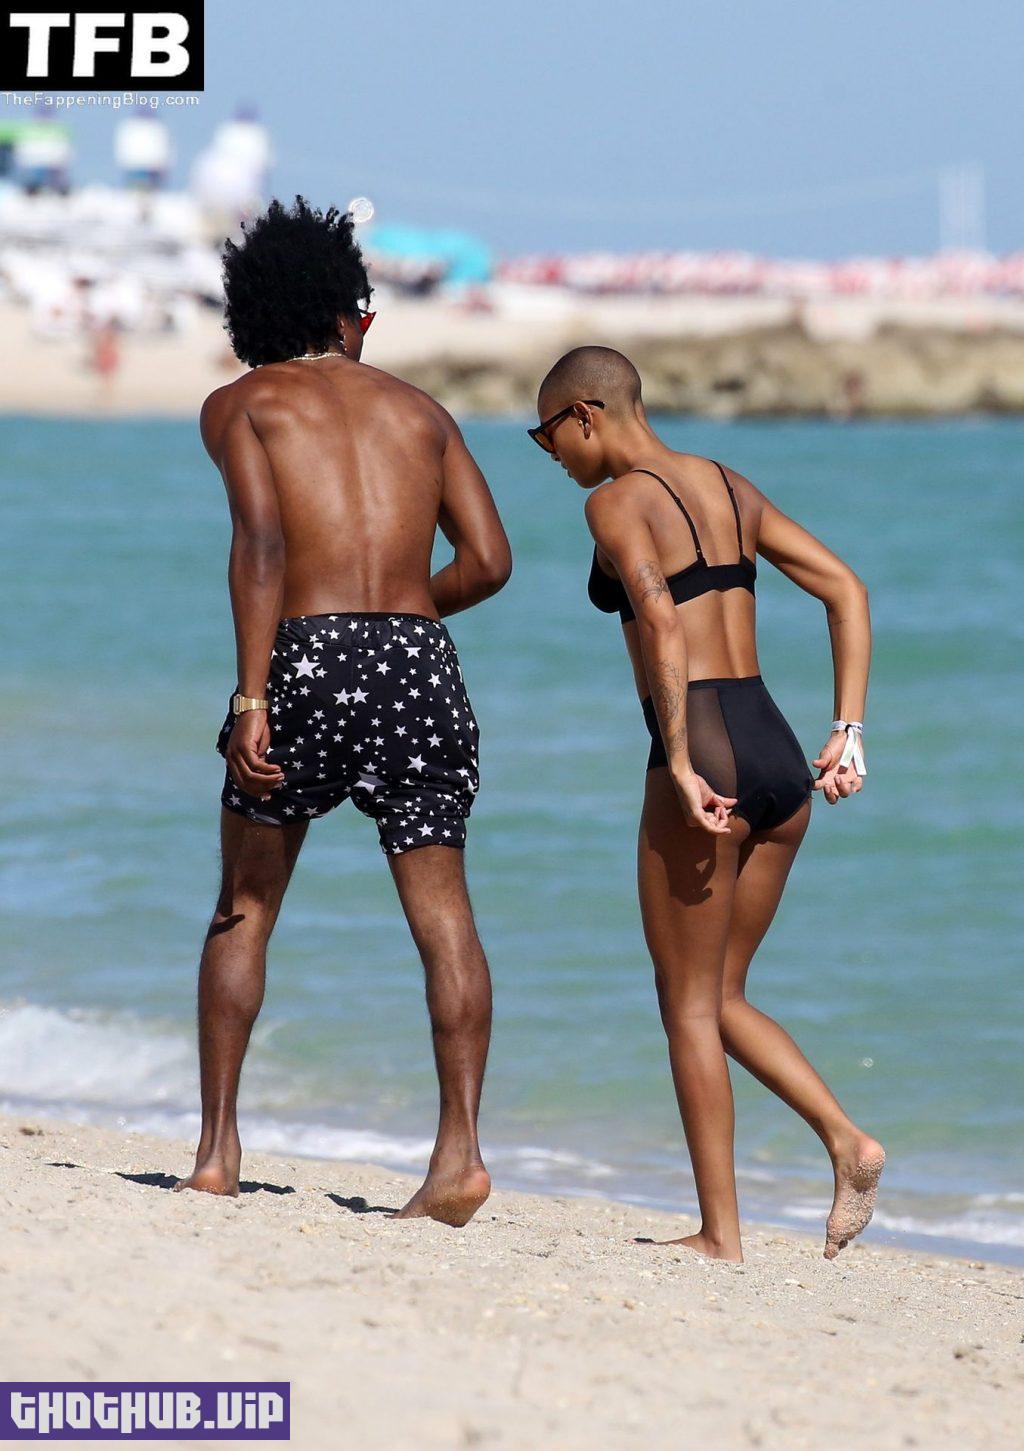 Willow Smith Sexy The Fappening Blog 82